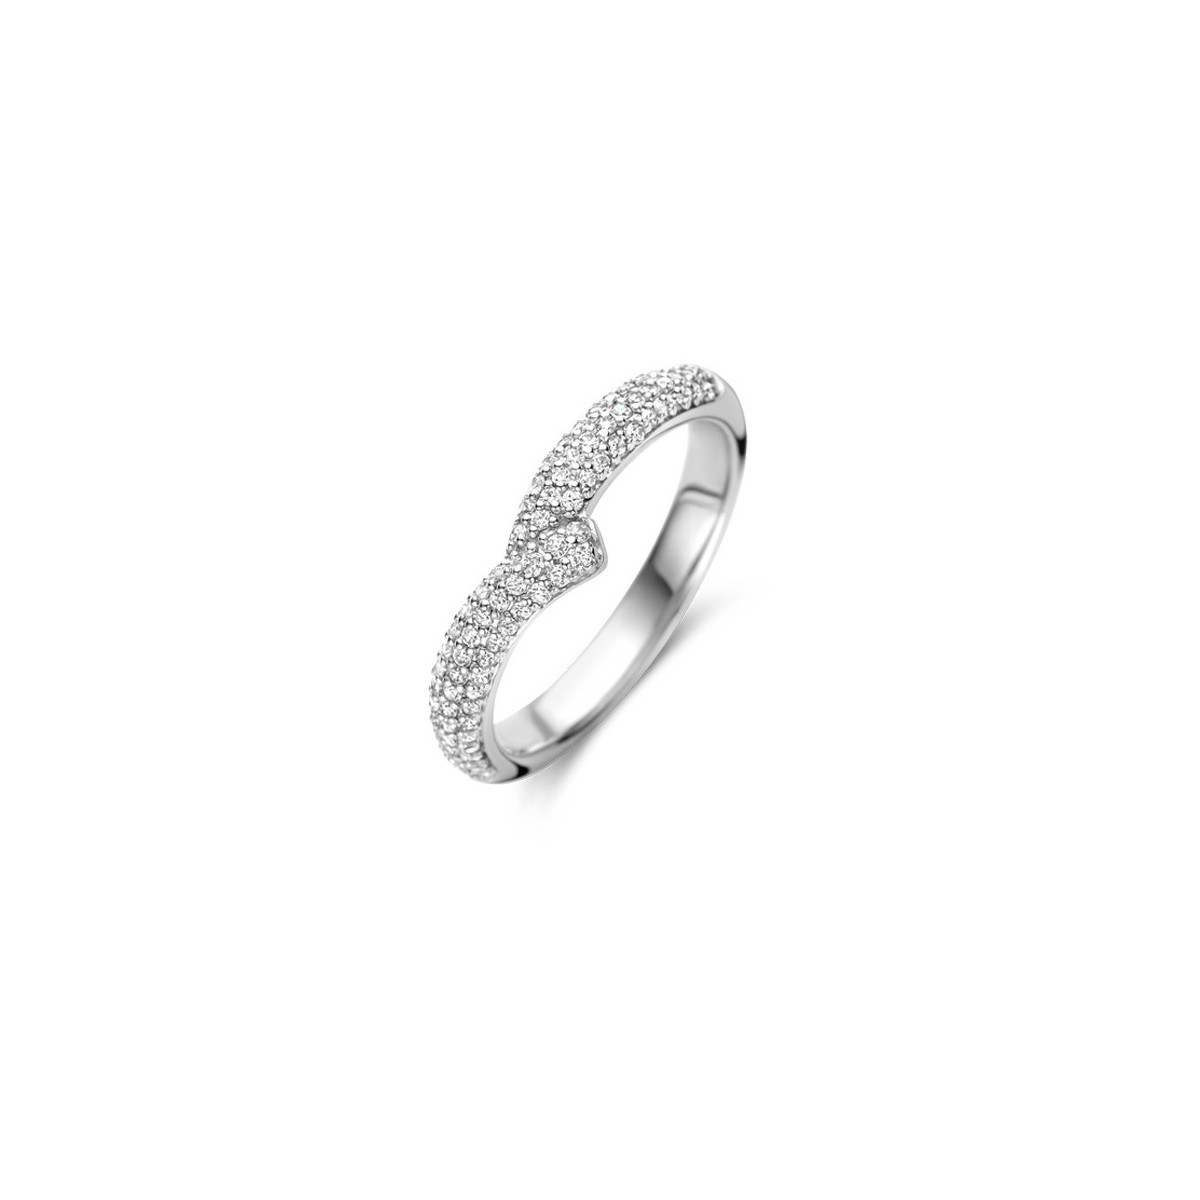 WAVE SHAPE RING WITH ZIRCONIA PAVE